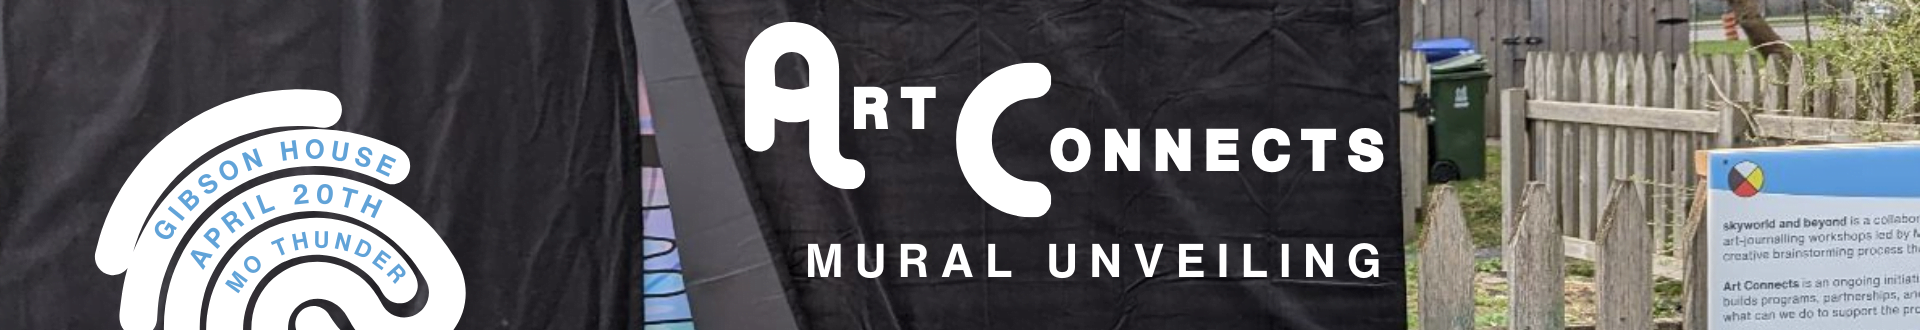 Art Connect Mural Unveiling Gibson House 12pm to 3pm